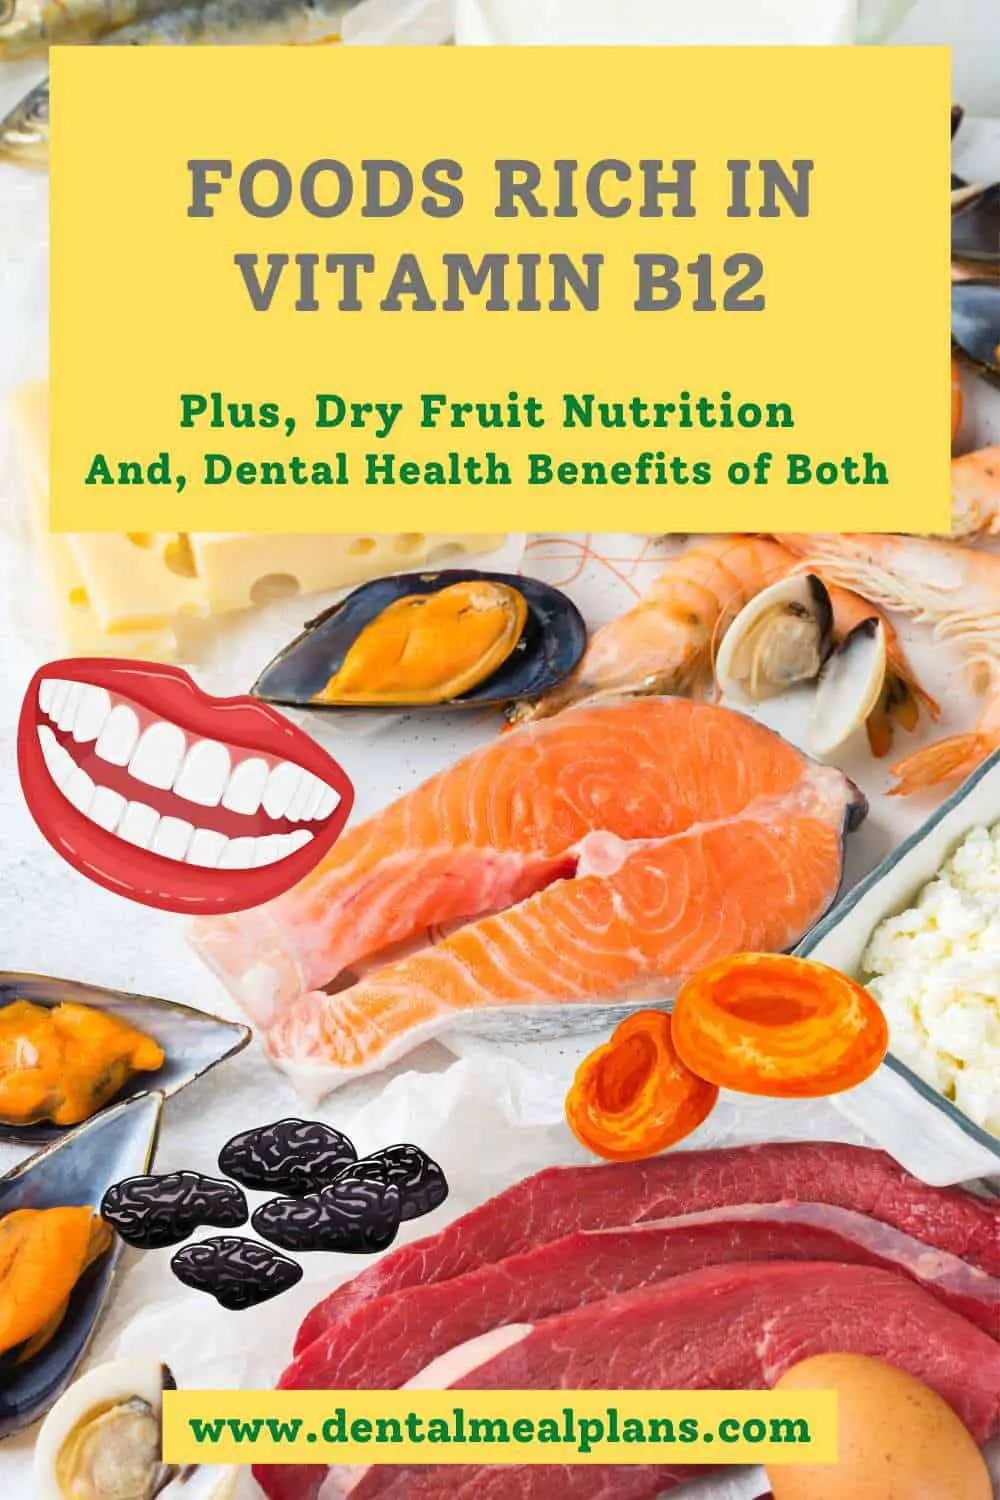 Foods rich in vitamin B12 images plus dry fruits nutrition and the dental health benefits of both